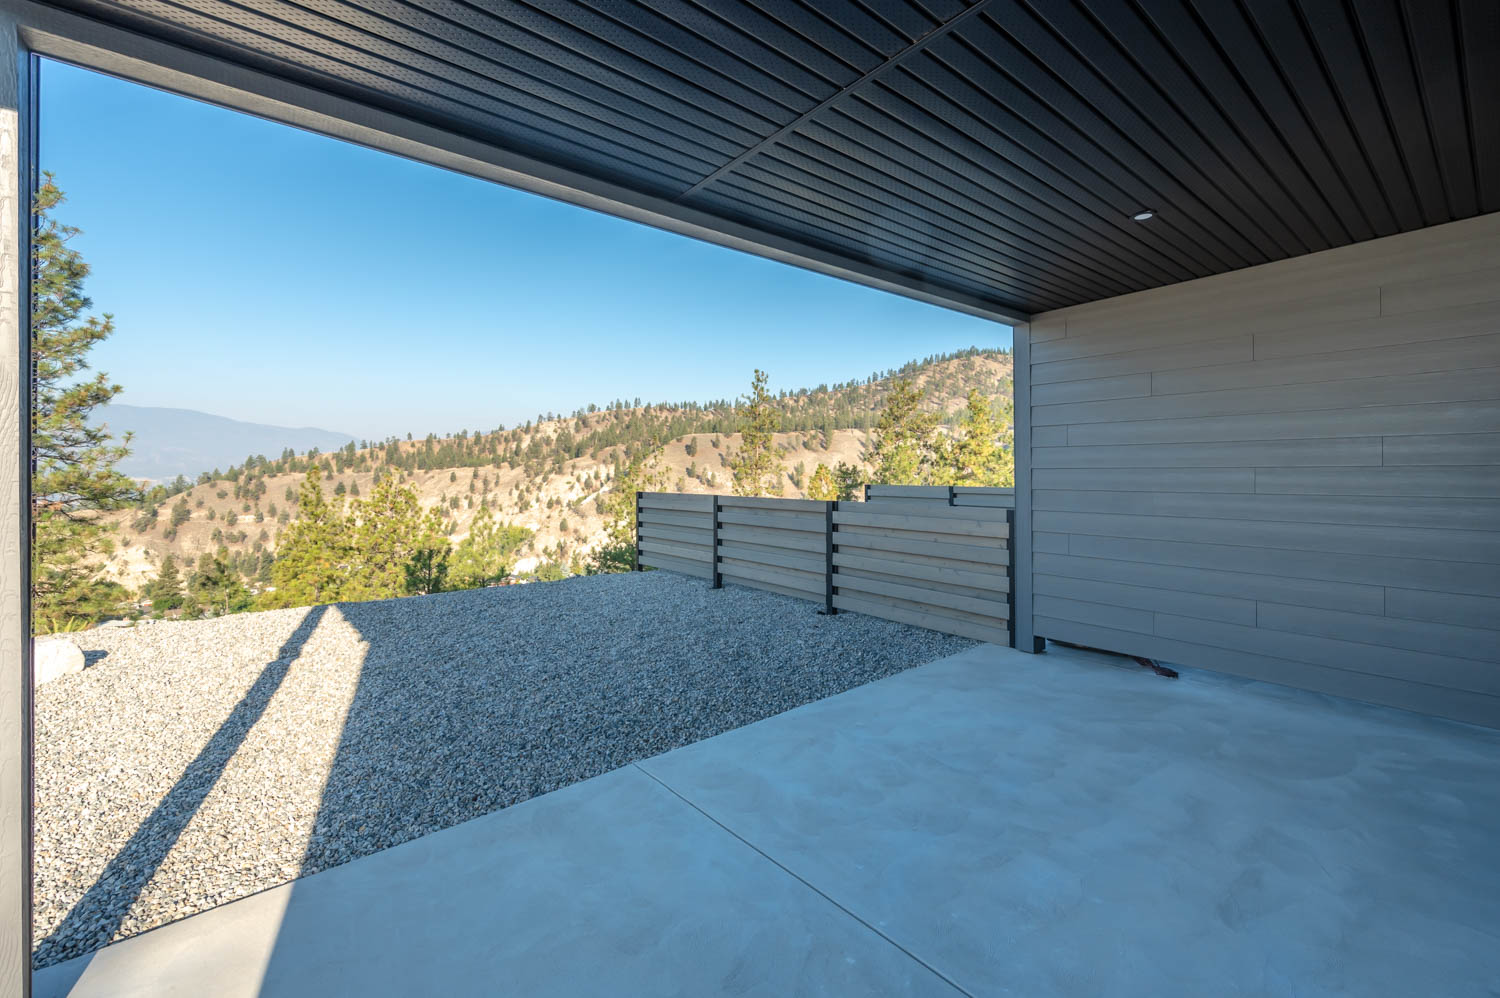 Covered patio with a view of the mountains